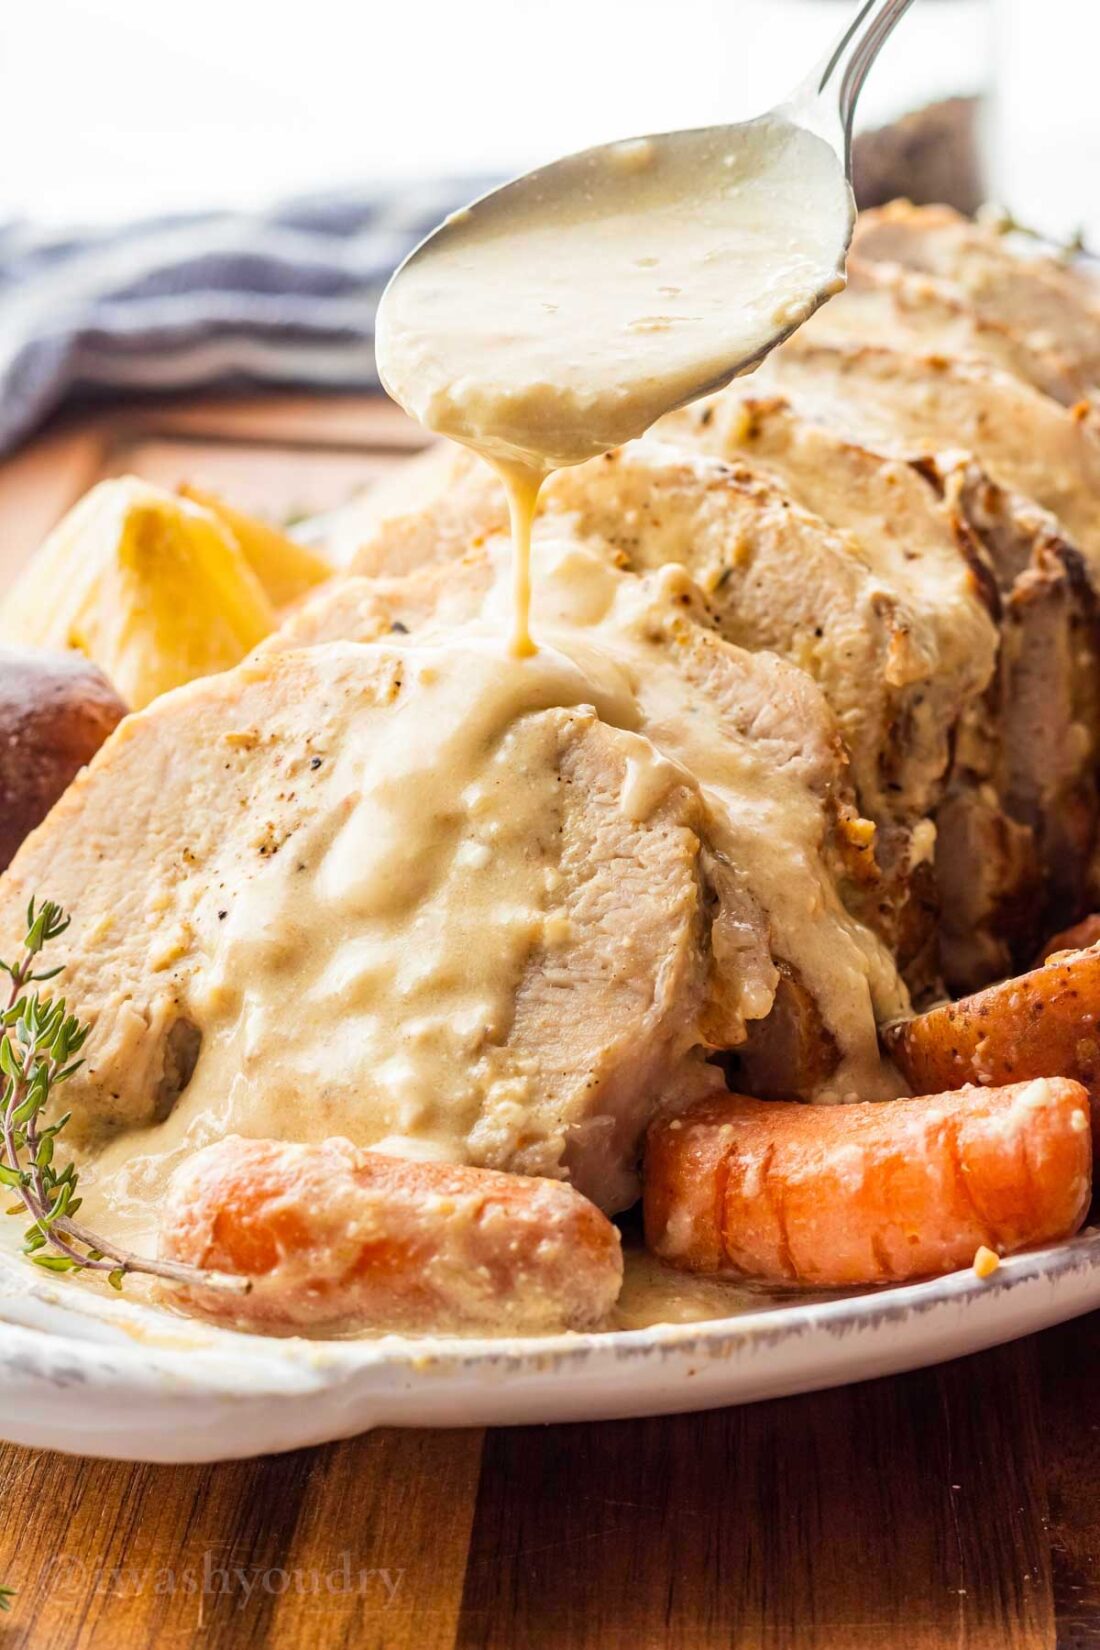 spooning creamy garlic sauce over sliced pork on white plate with carrots.